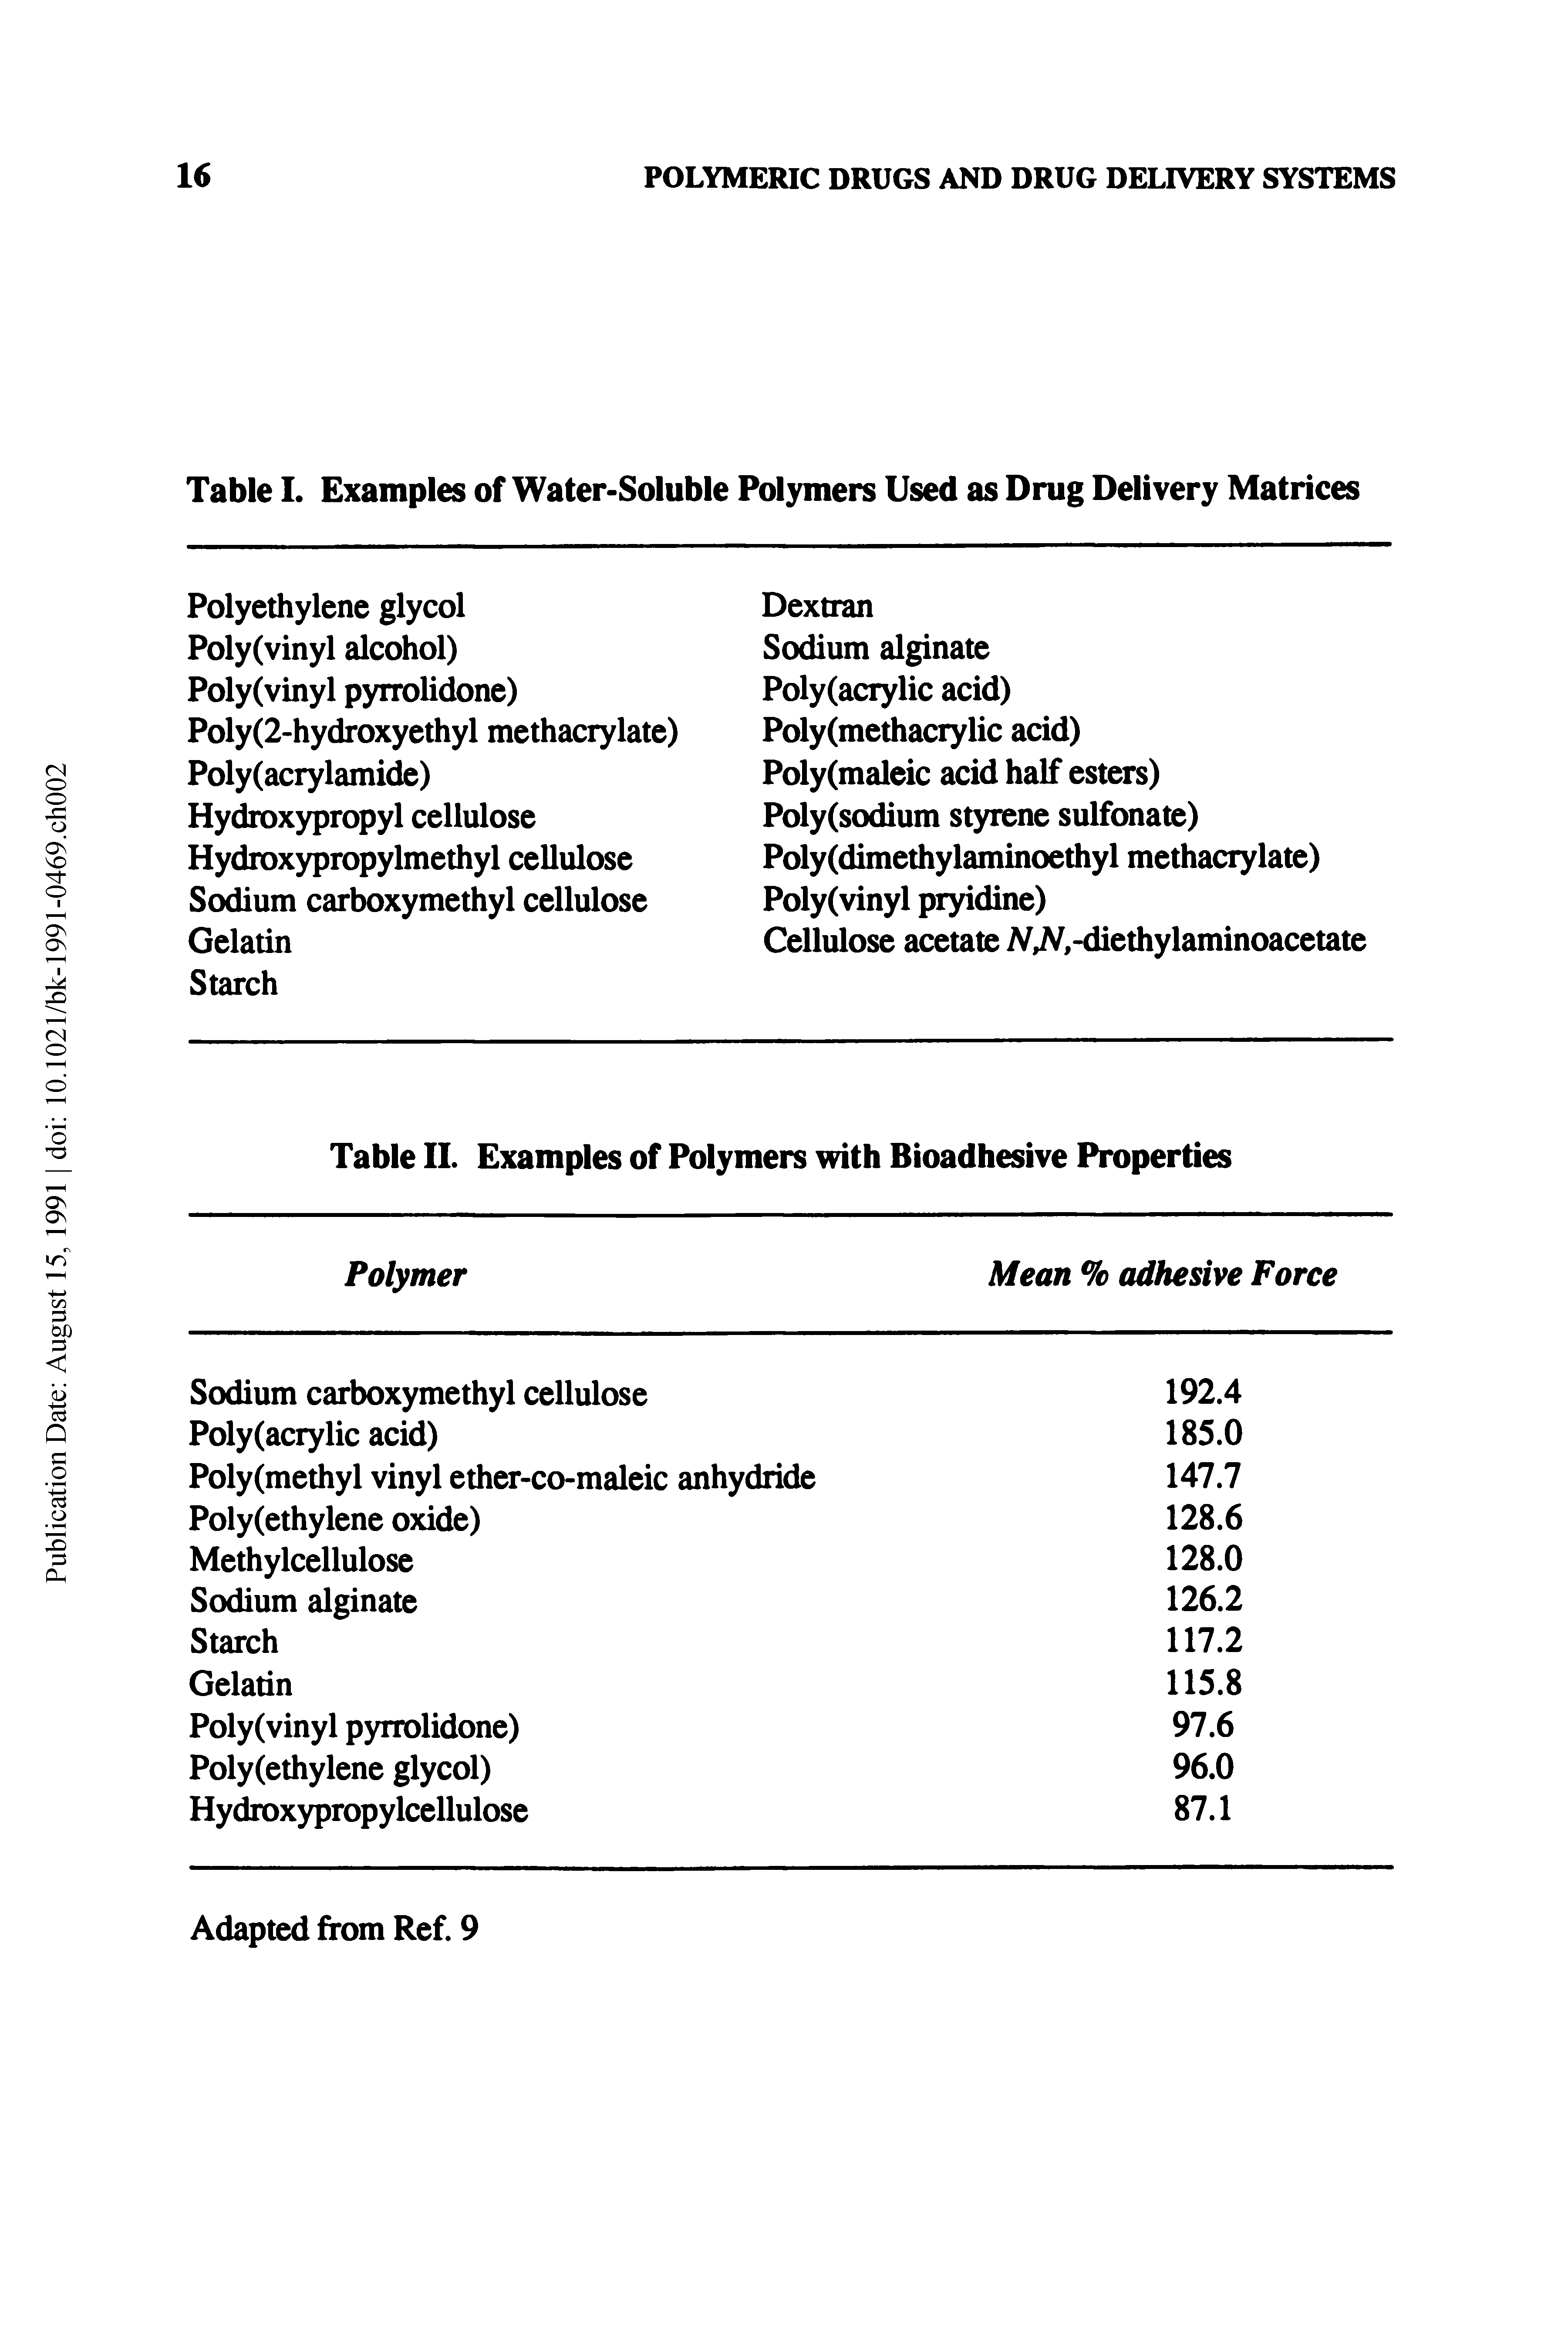 Table II. Examples of Polymers with Bioadhesive Properties...